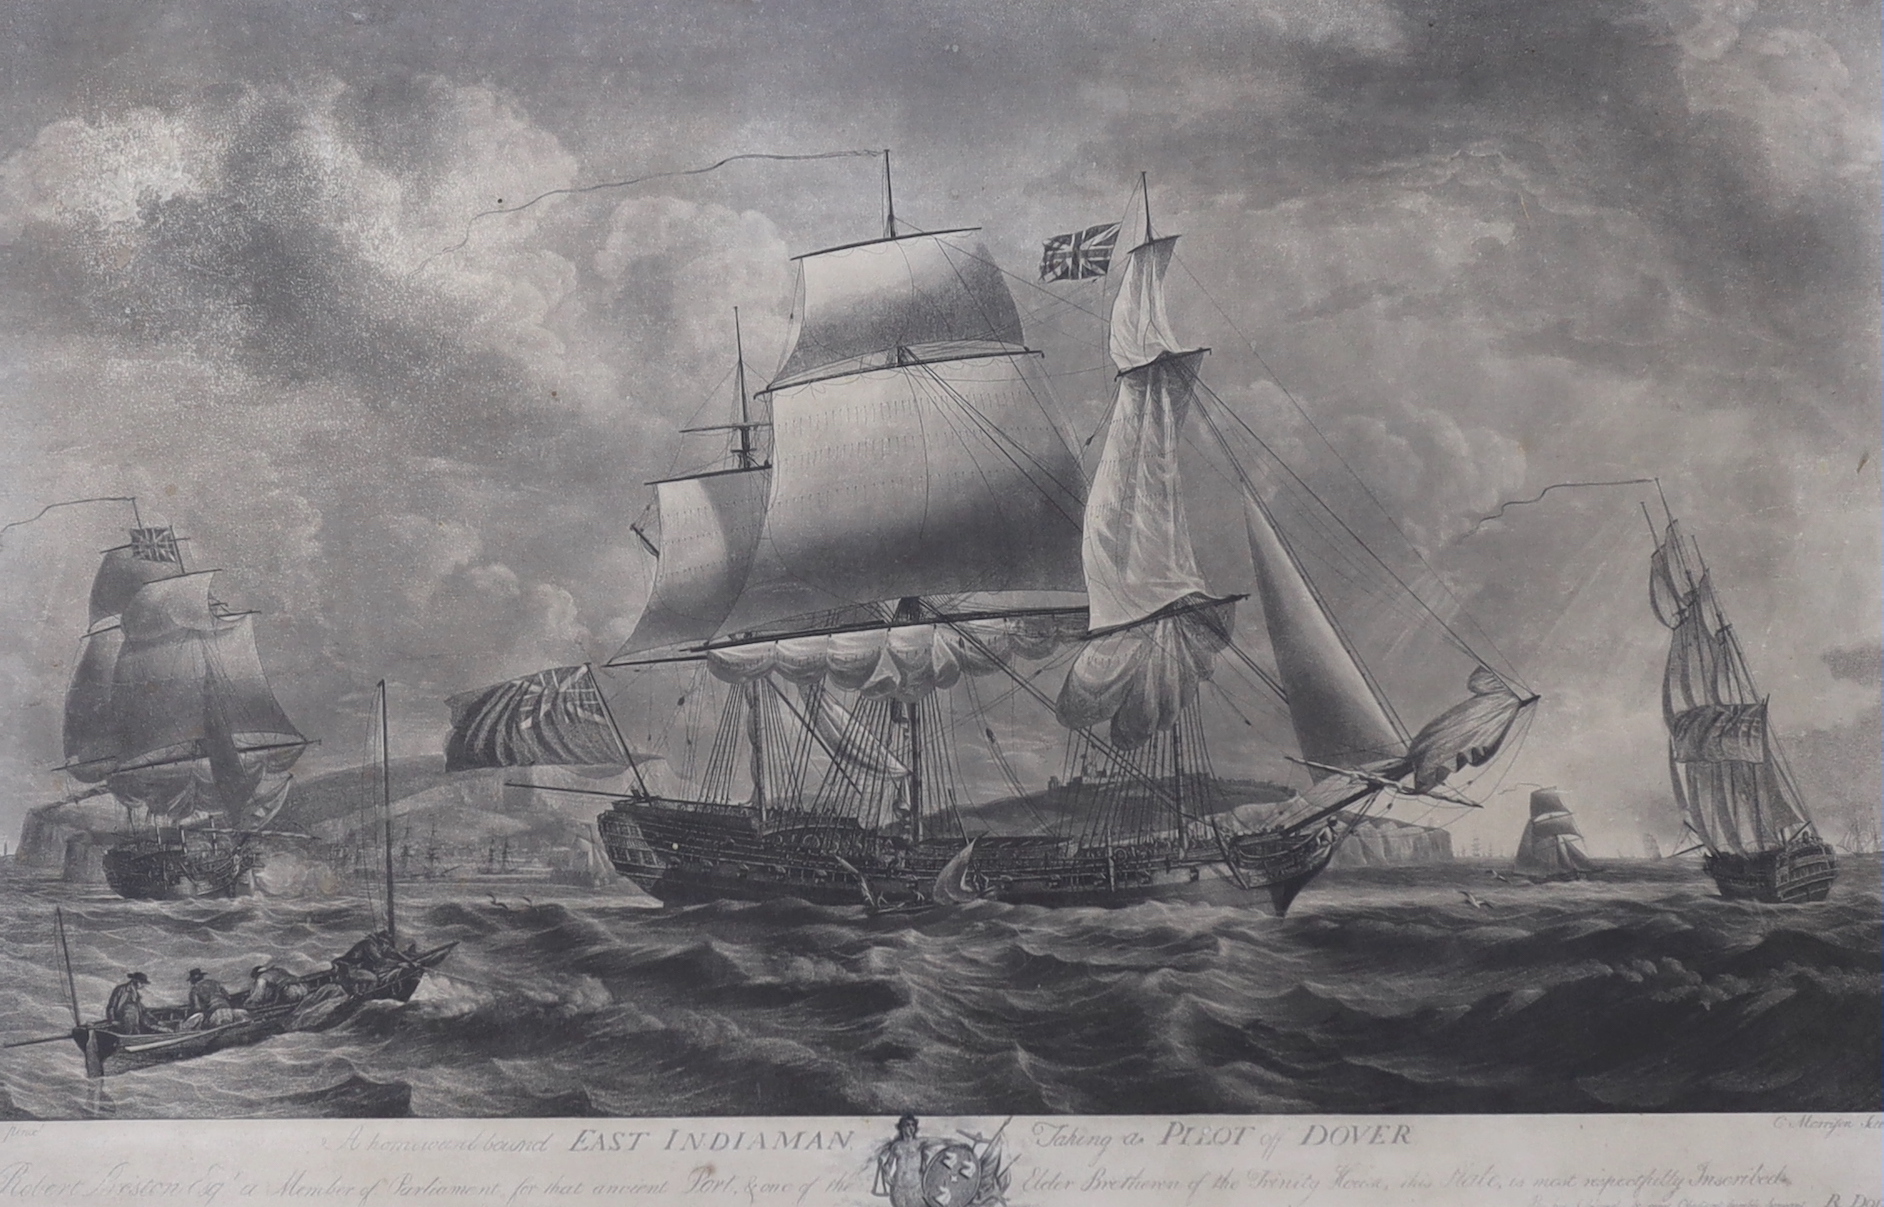 After Robert Dodd (1748-1816), engraving, 'A Homeward Bound East Indiaman, Taking Port off Dover', publ. 22nd February 1787 by R Pollard, London, 42 x 65cm